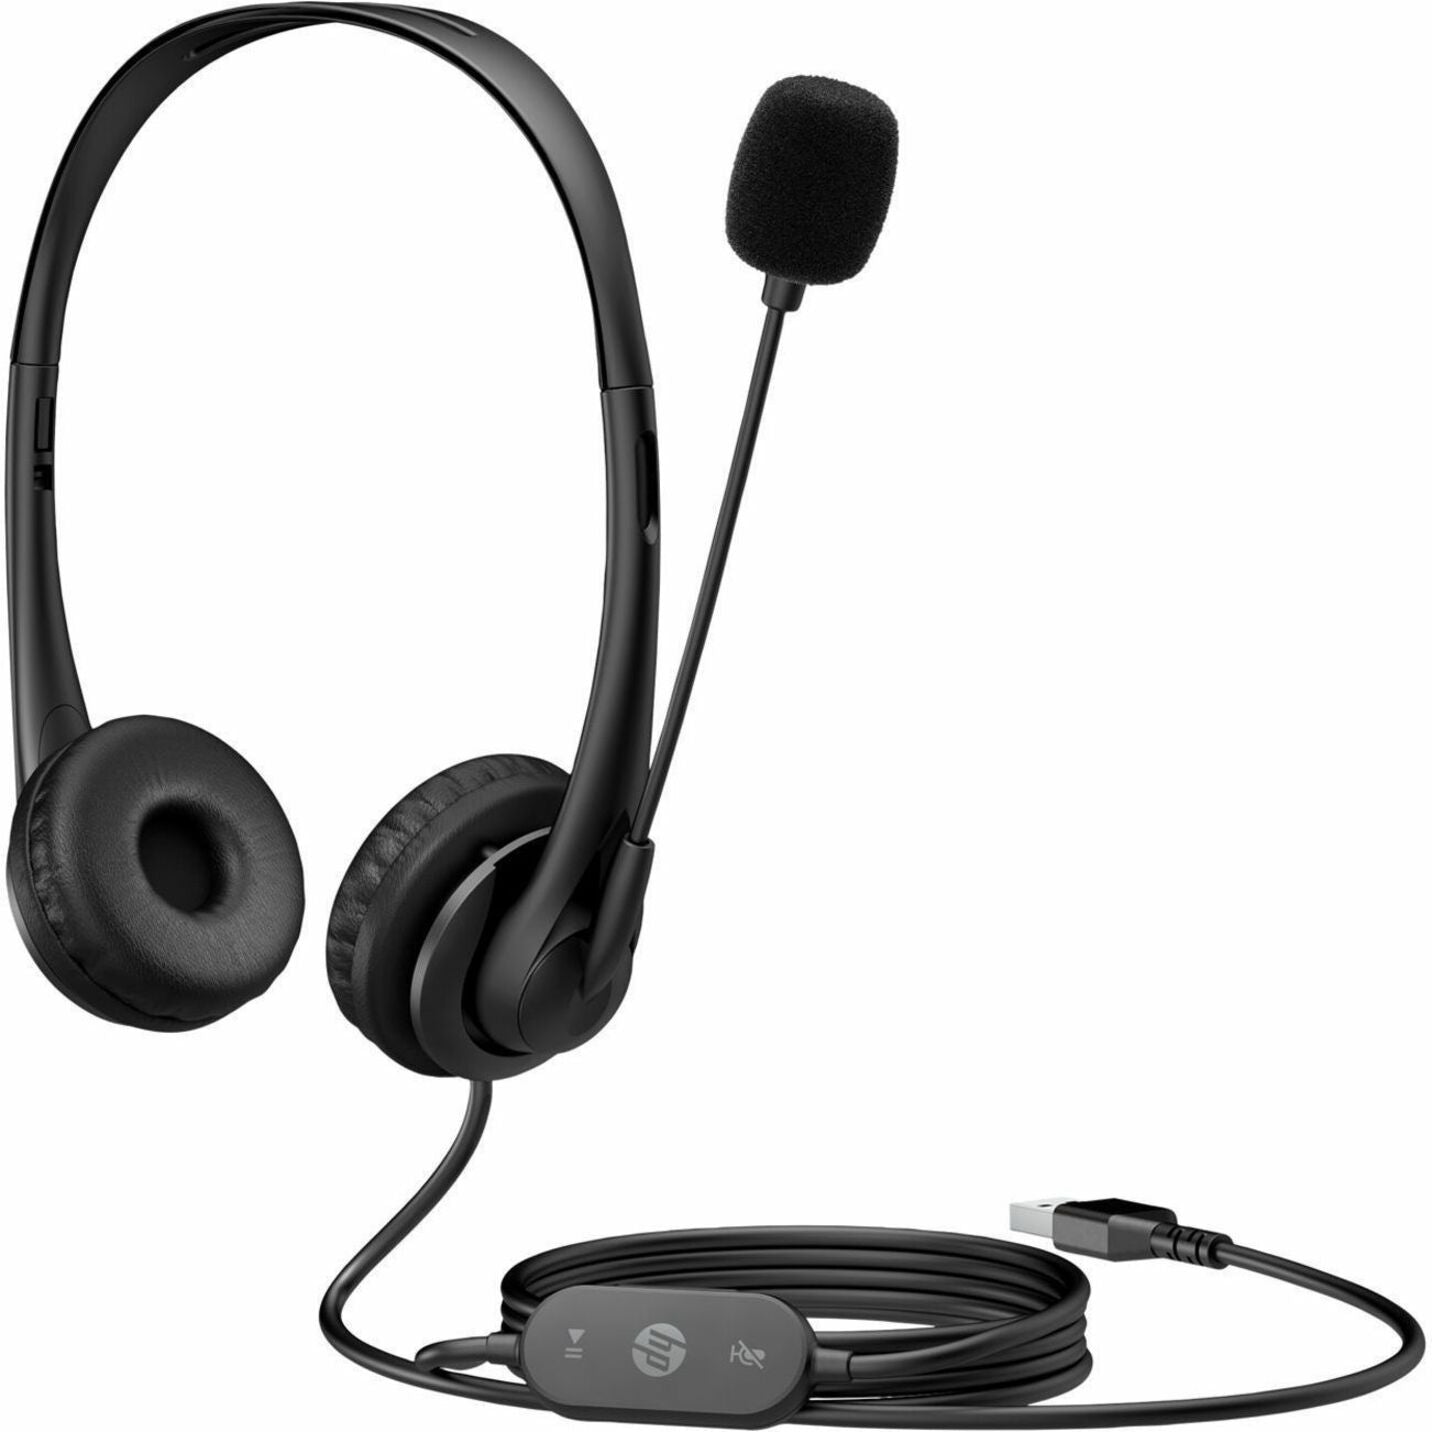 HP 428H5AA#ABL Stereo USB Headset G2, Comfortable, Adjustable Strap, Durable, In-Line Volume Control